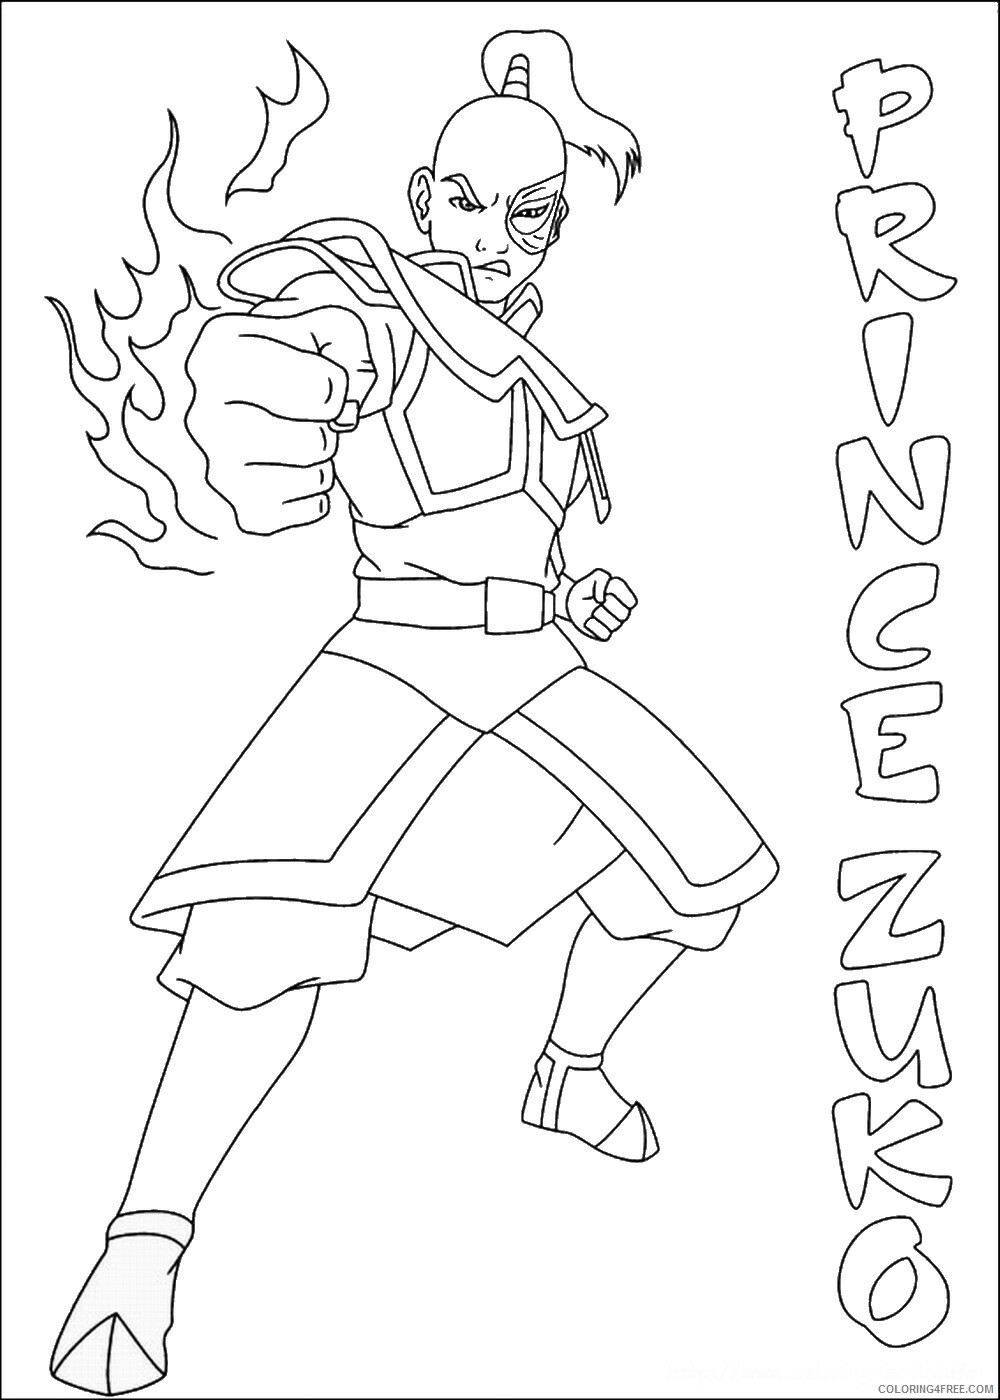 Avatar the Last Airbender Coloring Pages TV Film avatar_cl122 Printable 2020 00280 Coloring4free